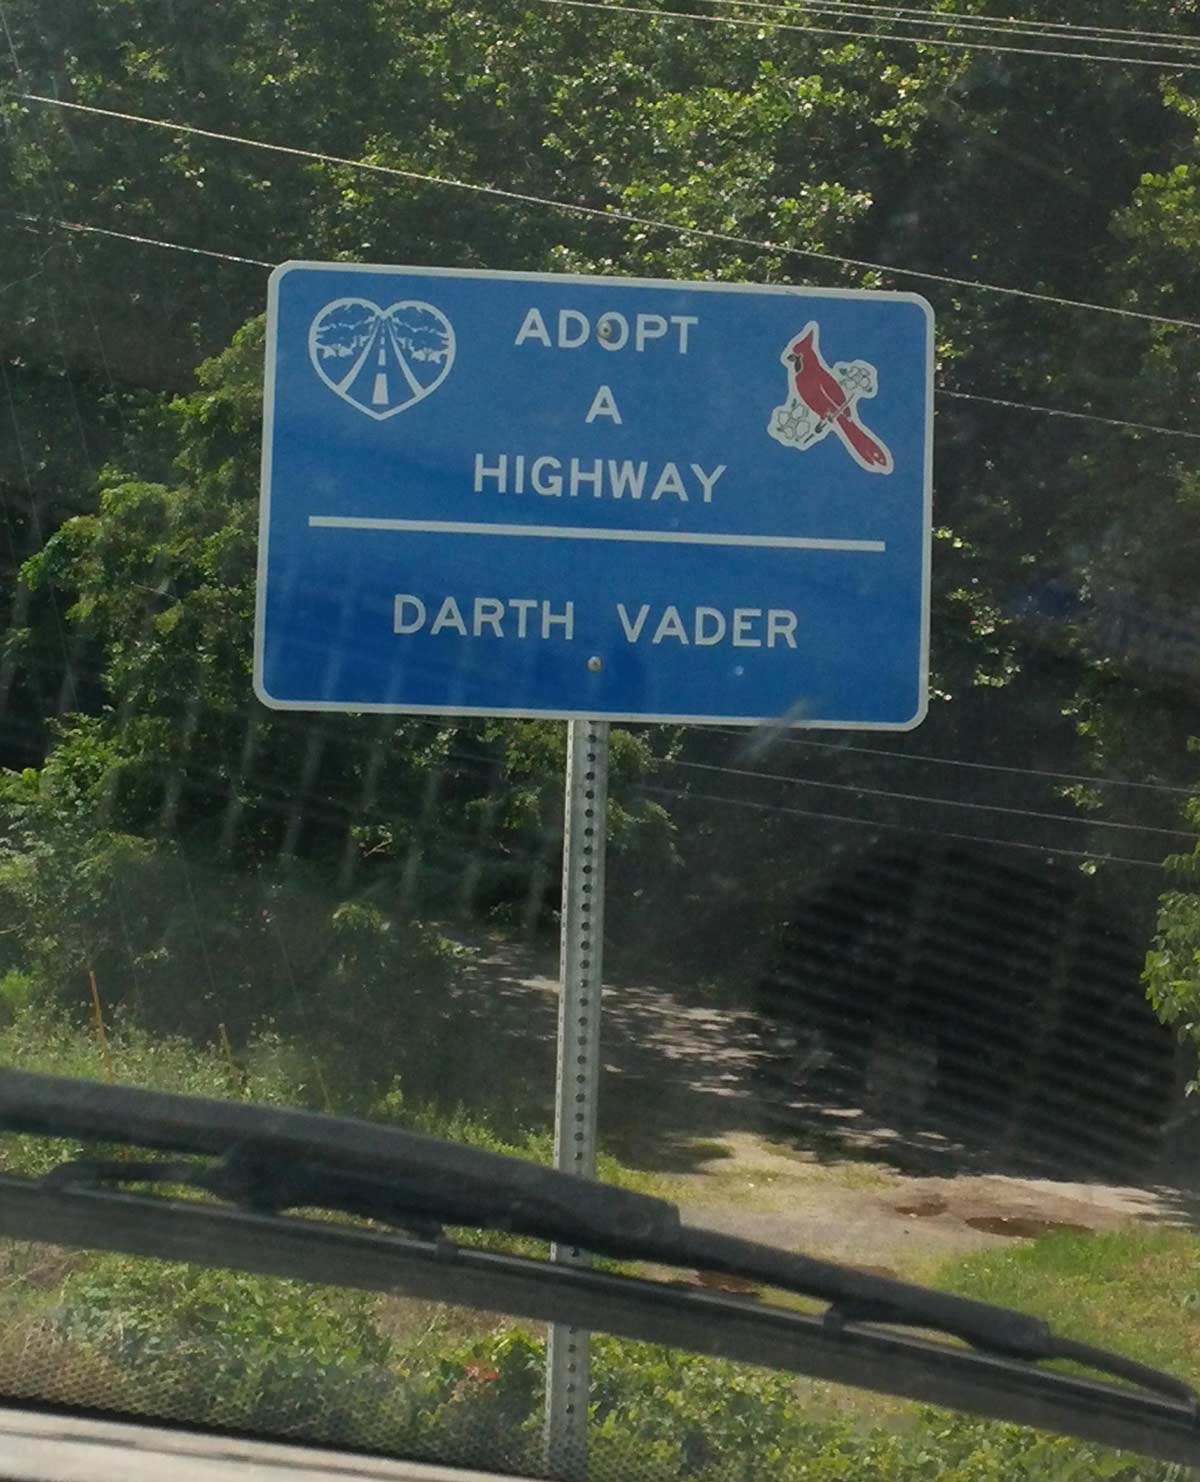 Glad to see Darth Vader is giving back to the community